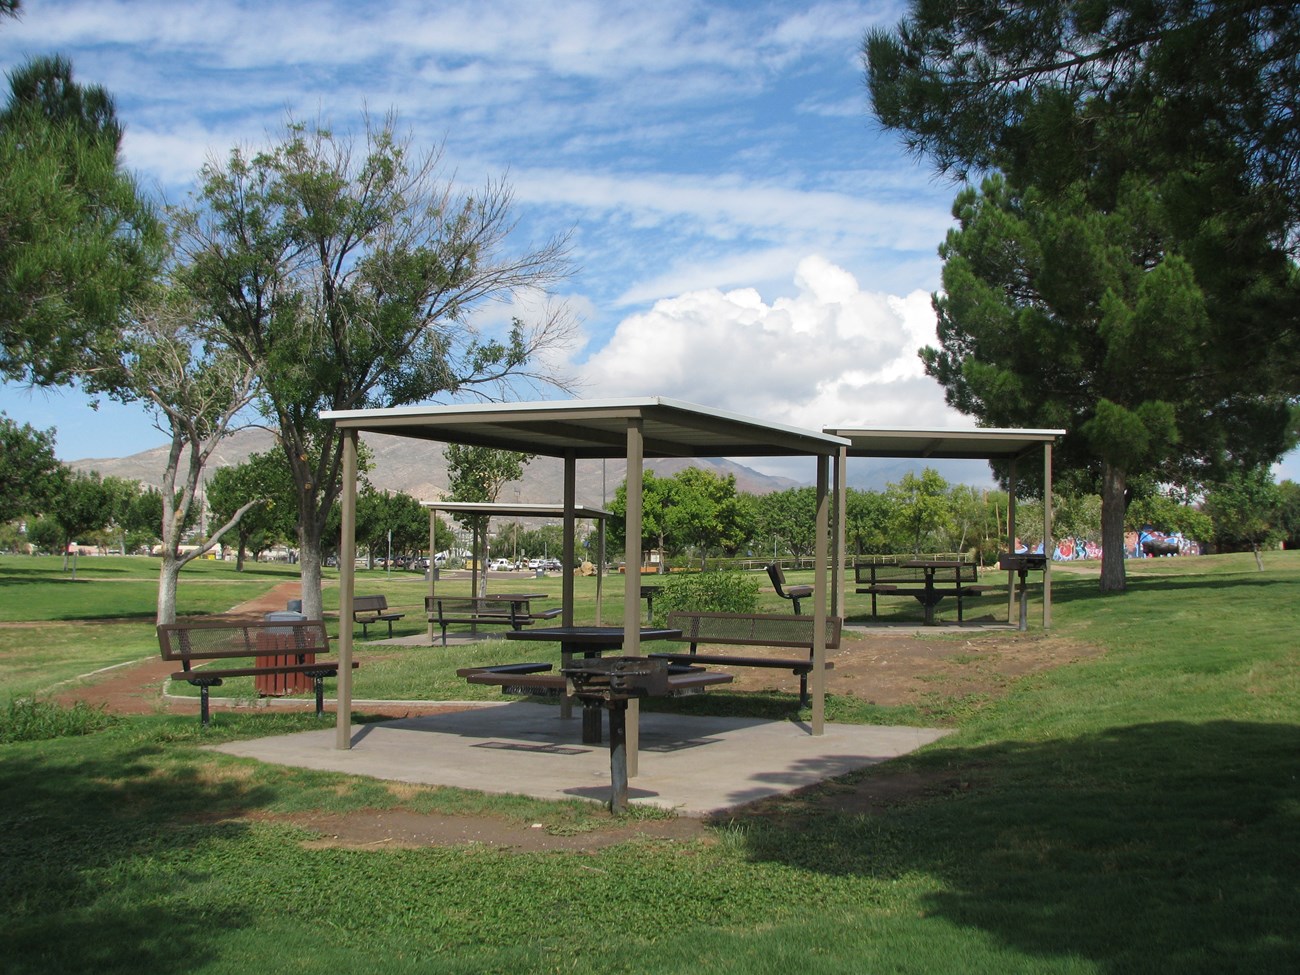 Three picnic tables with cover and grills.